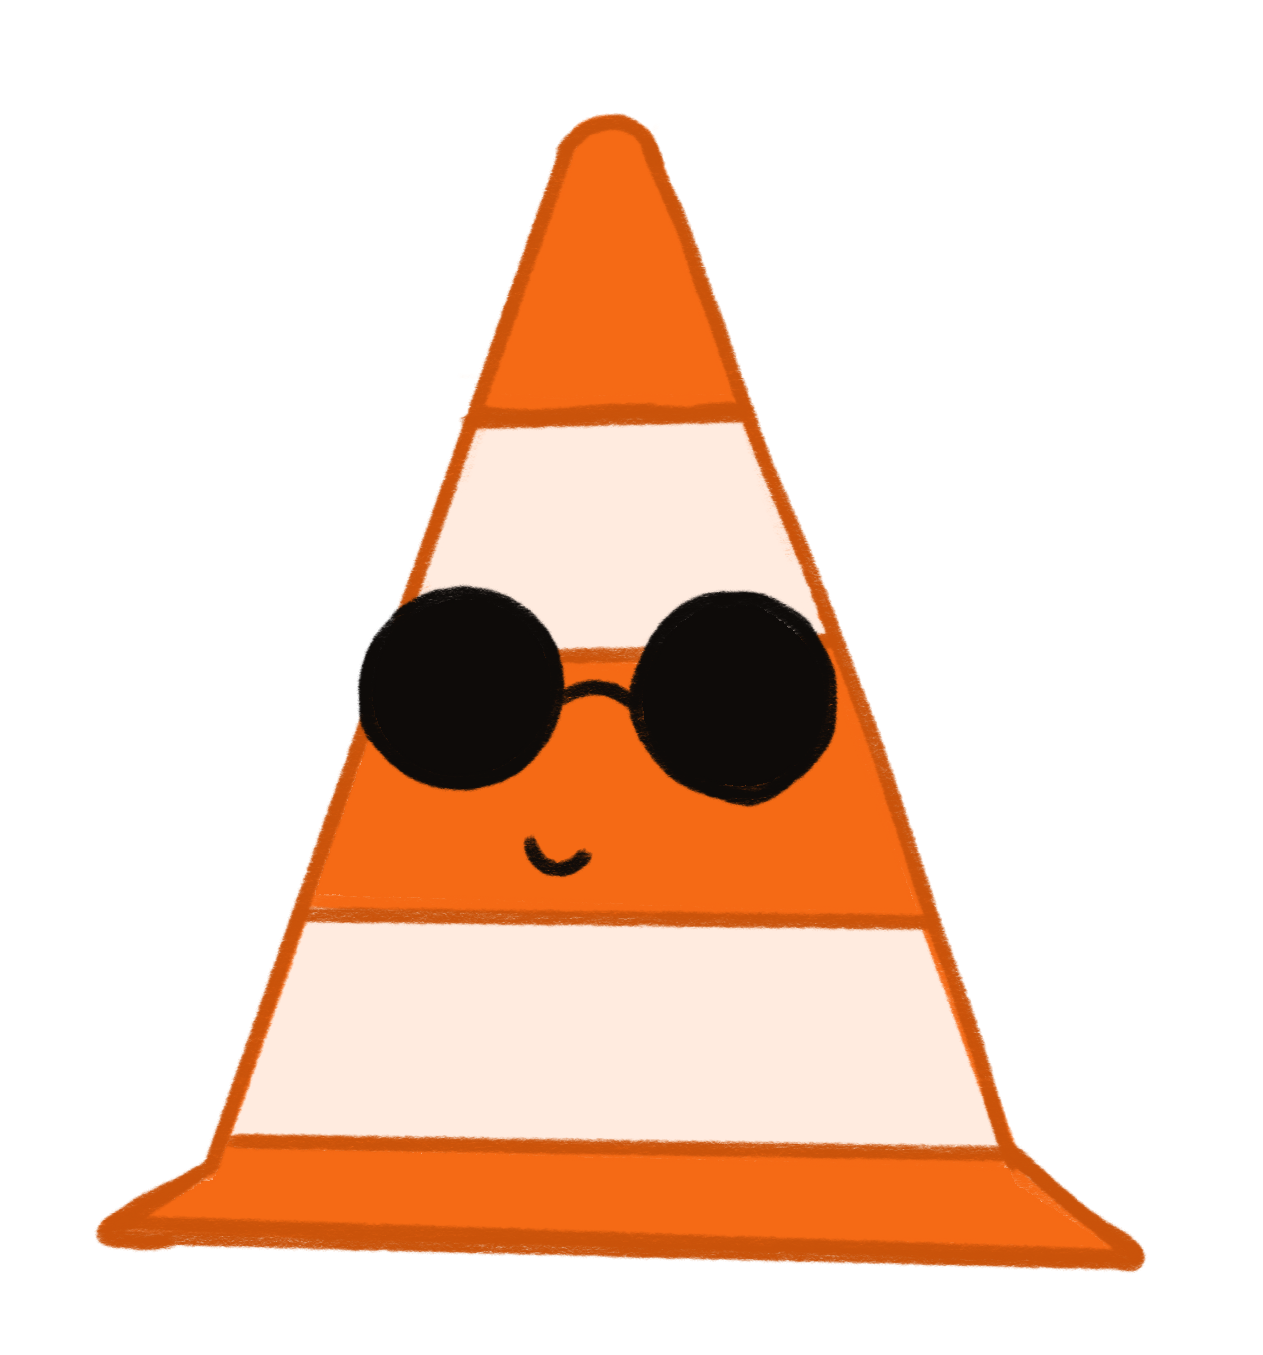 cool and chill cartoon construction cone